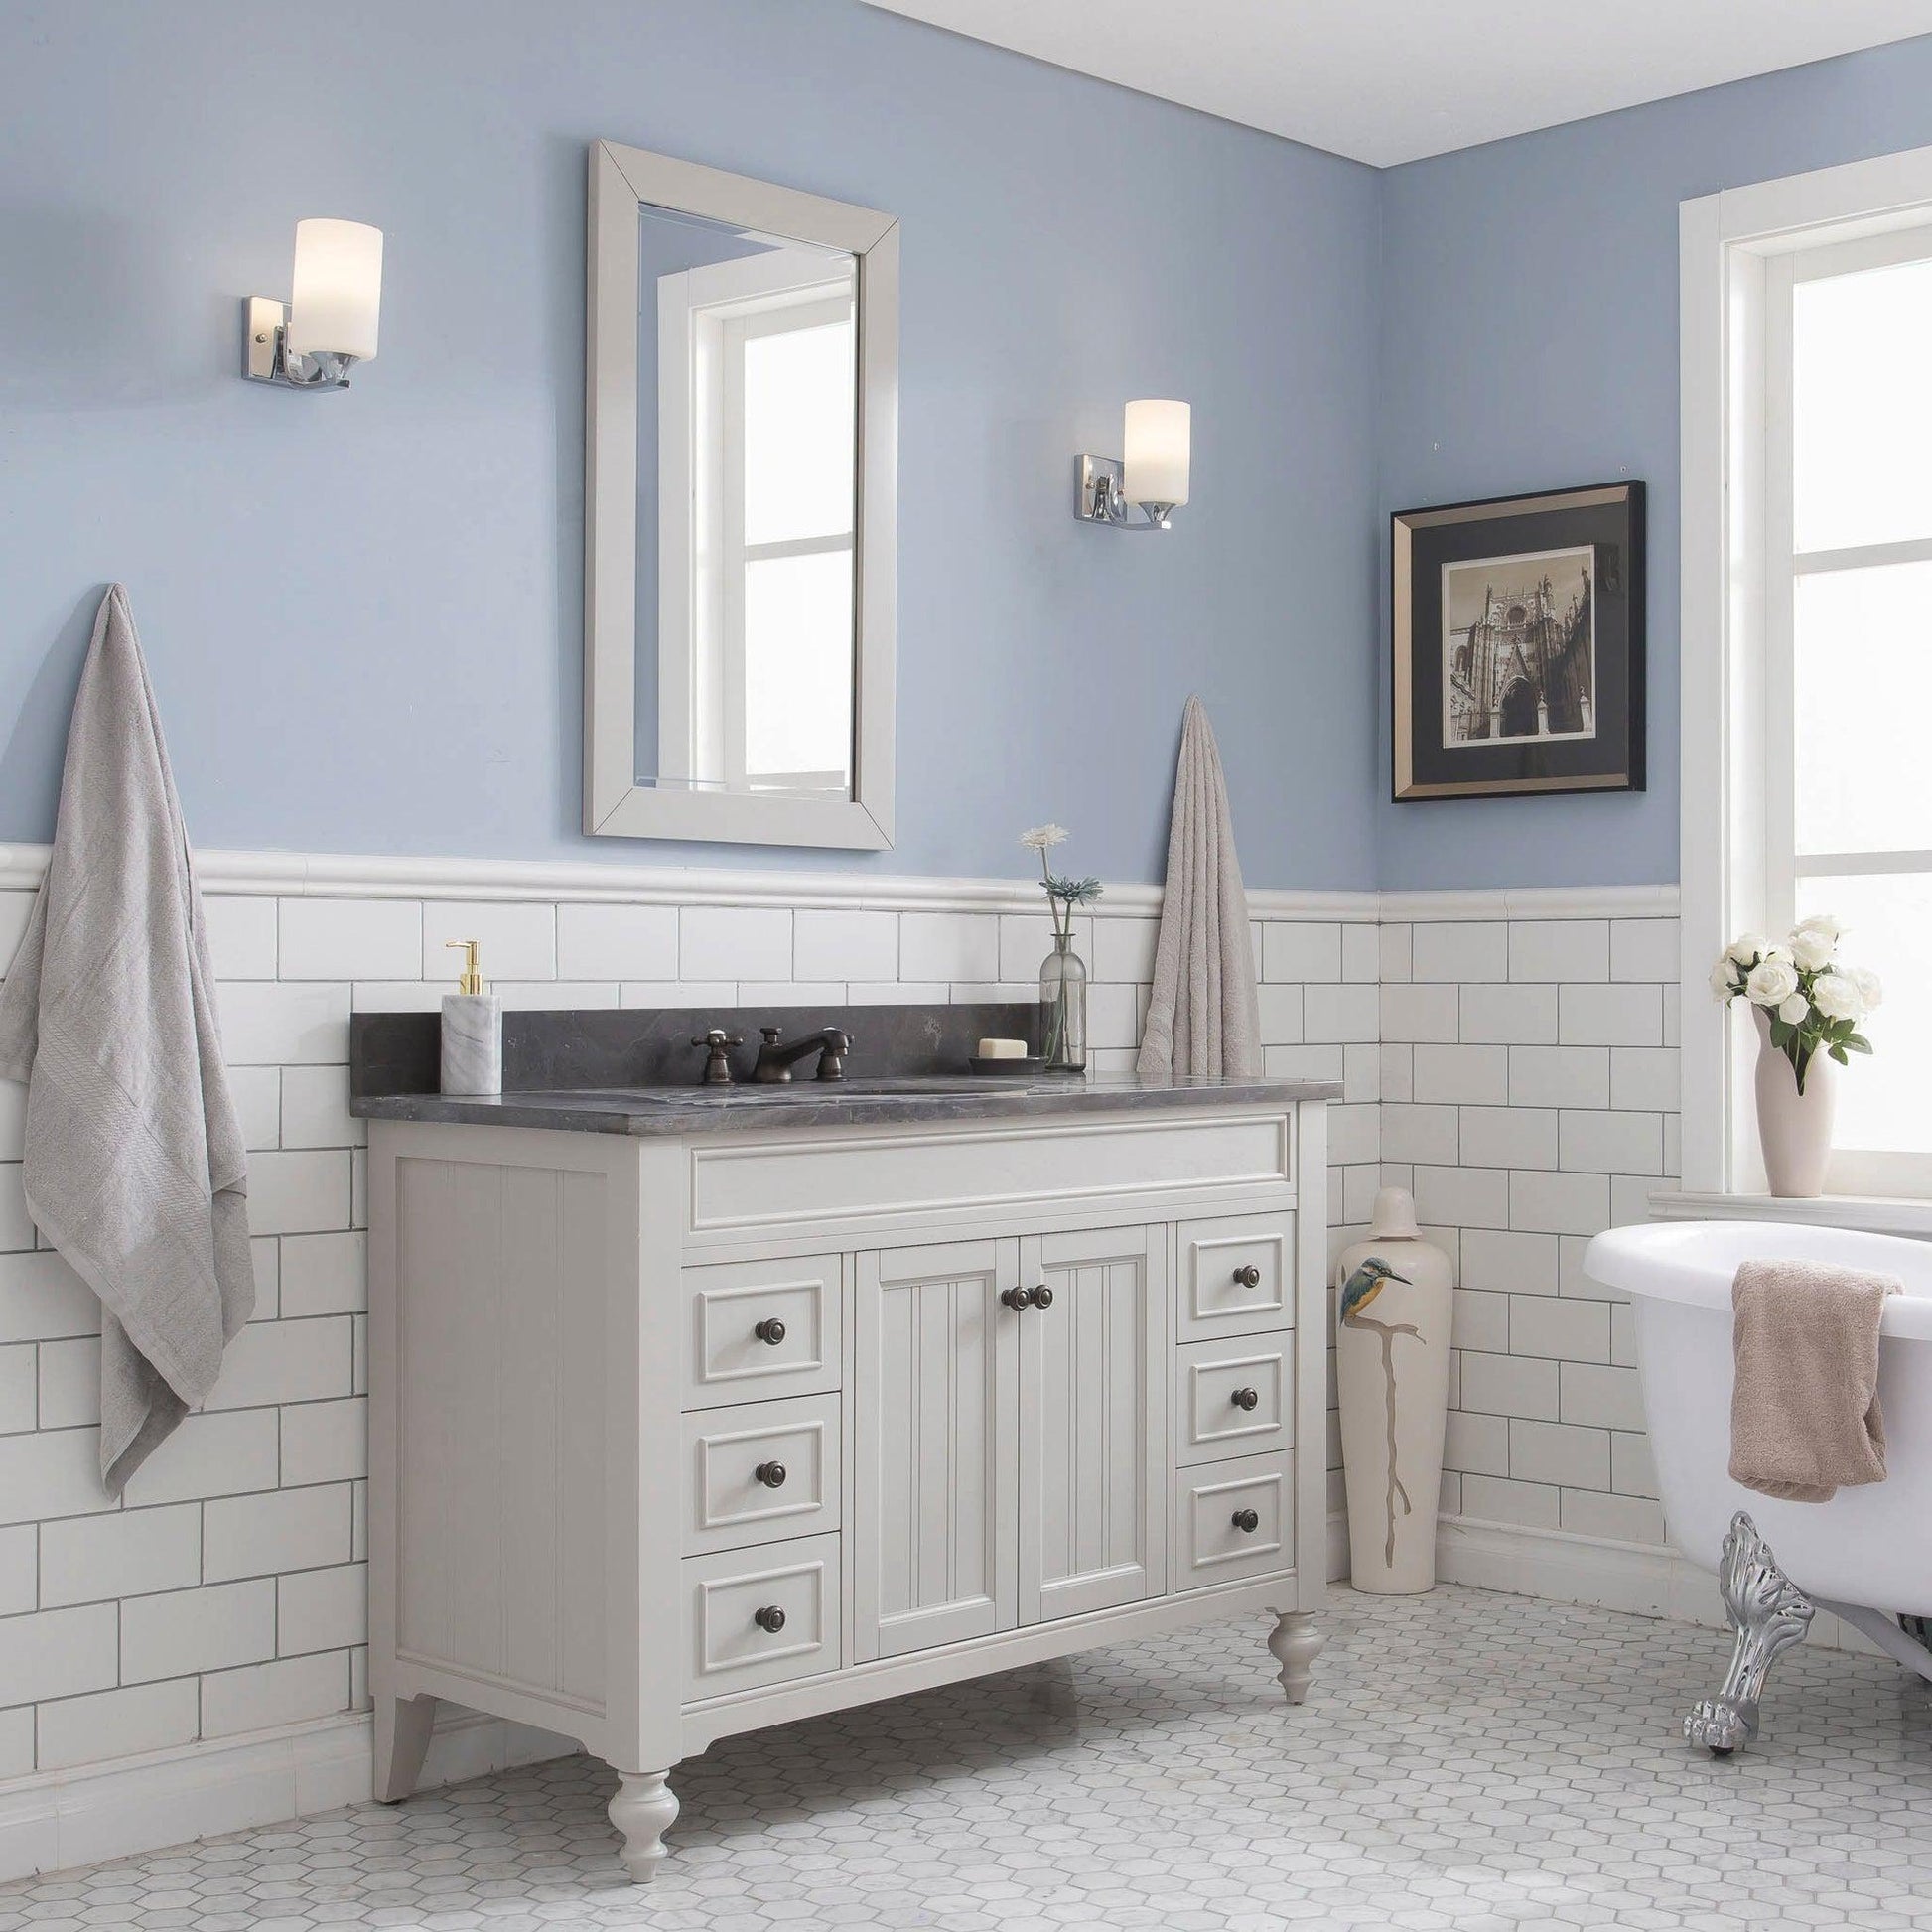 Water Creation Potenza 48" Bathroom Vanity in Earl Grey Finish with Blue Limestone Top with Faucet and Mirror